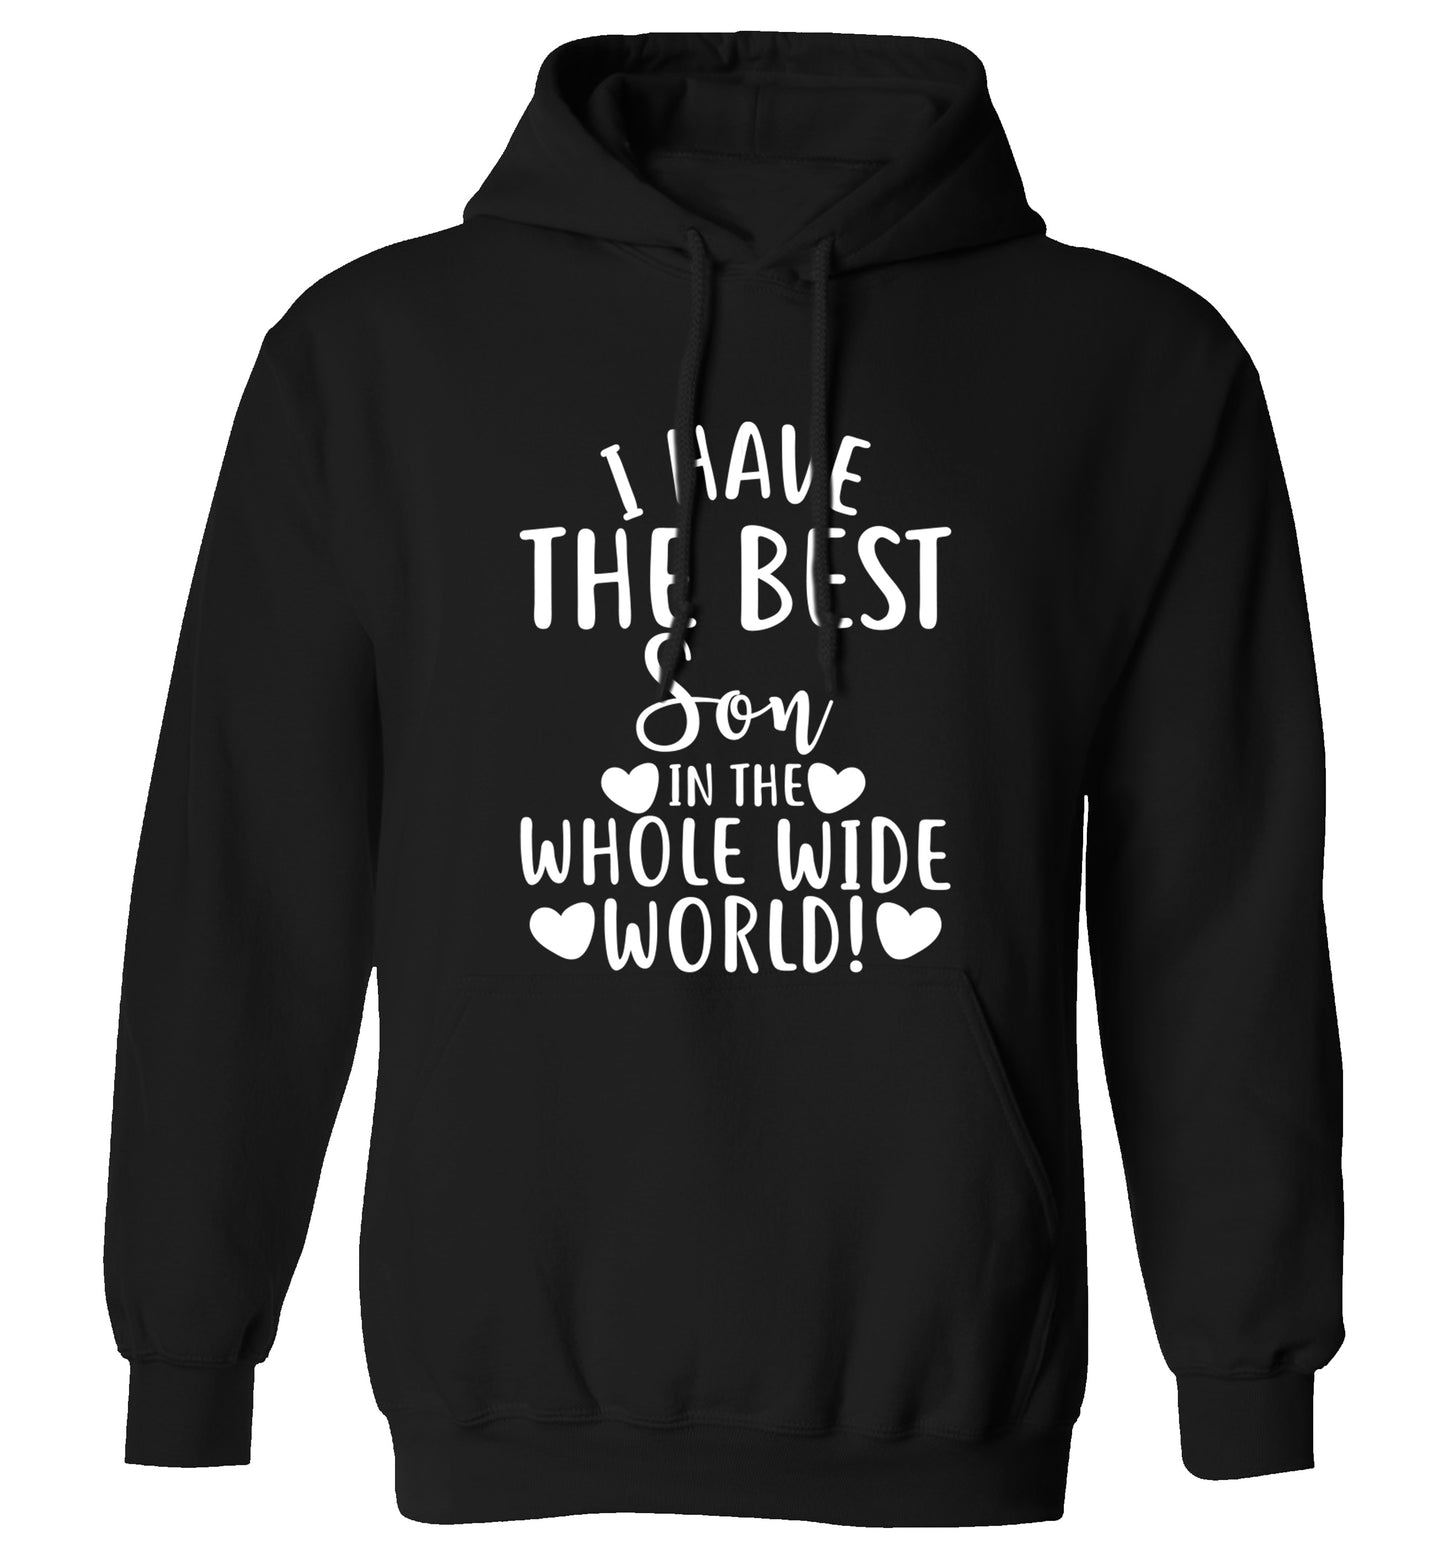 I have the best son in the whole wide world! adults unisex black hoodie 2XL